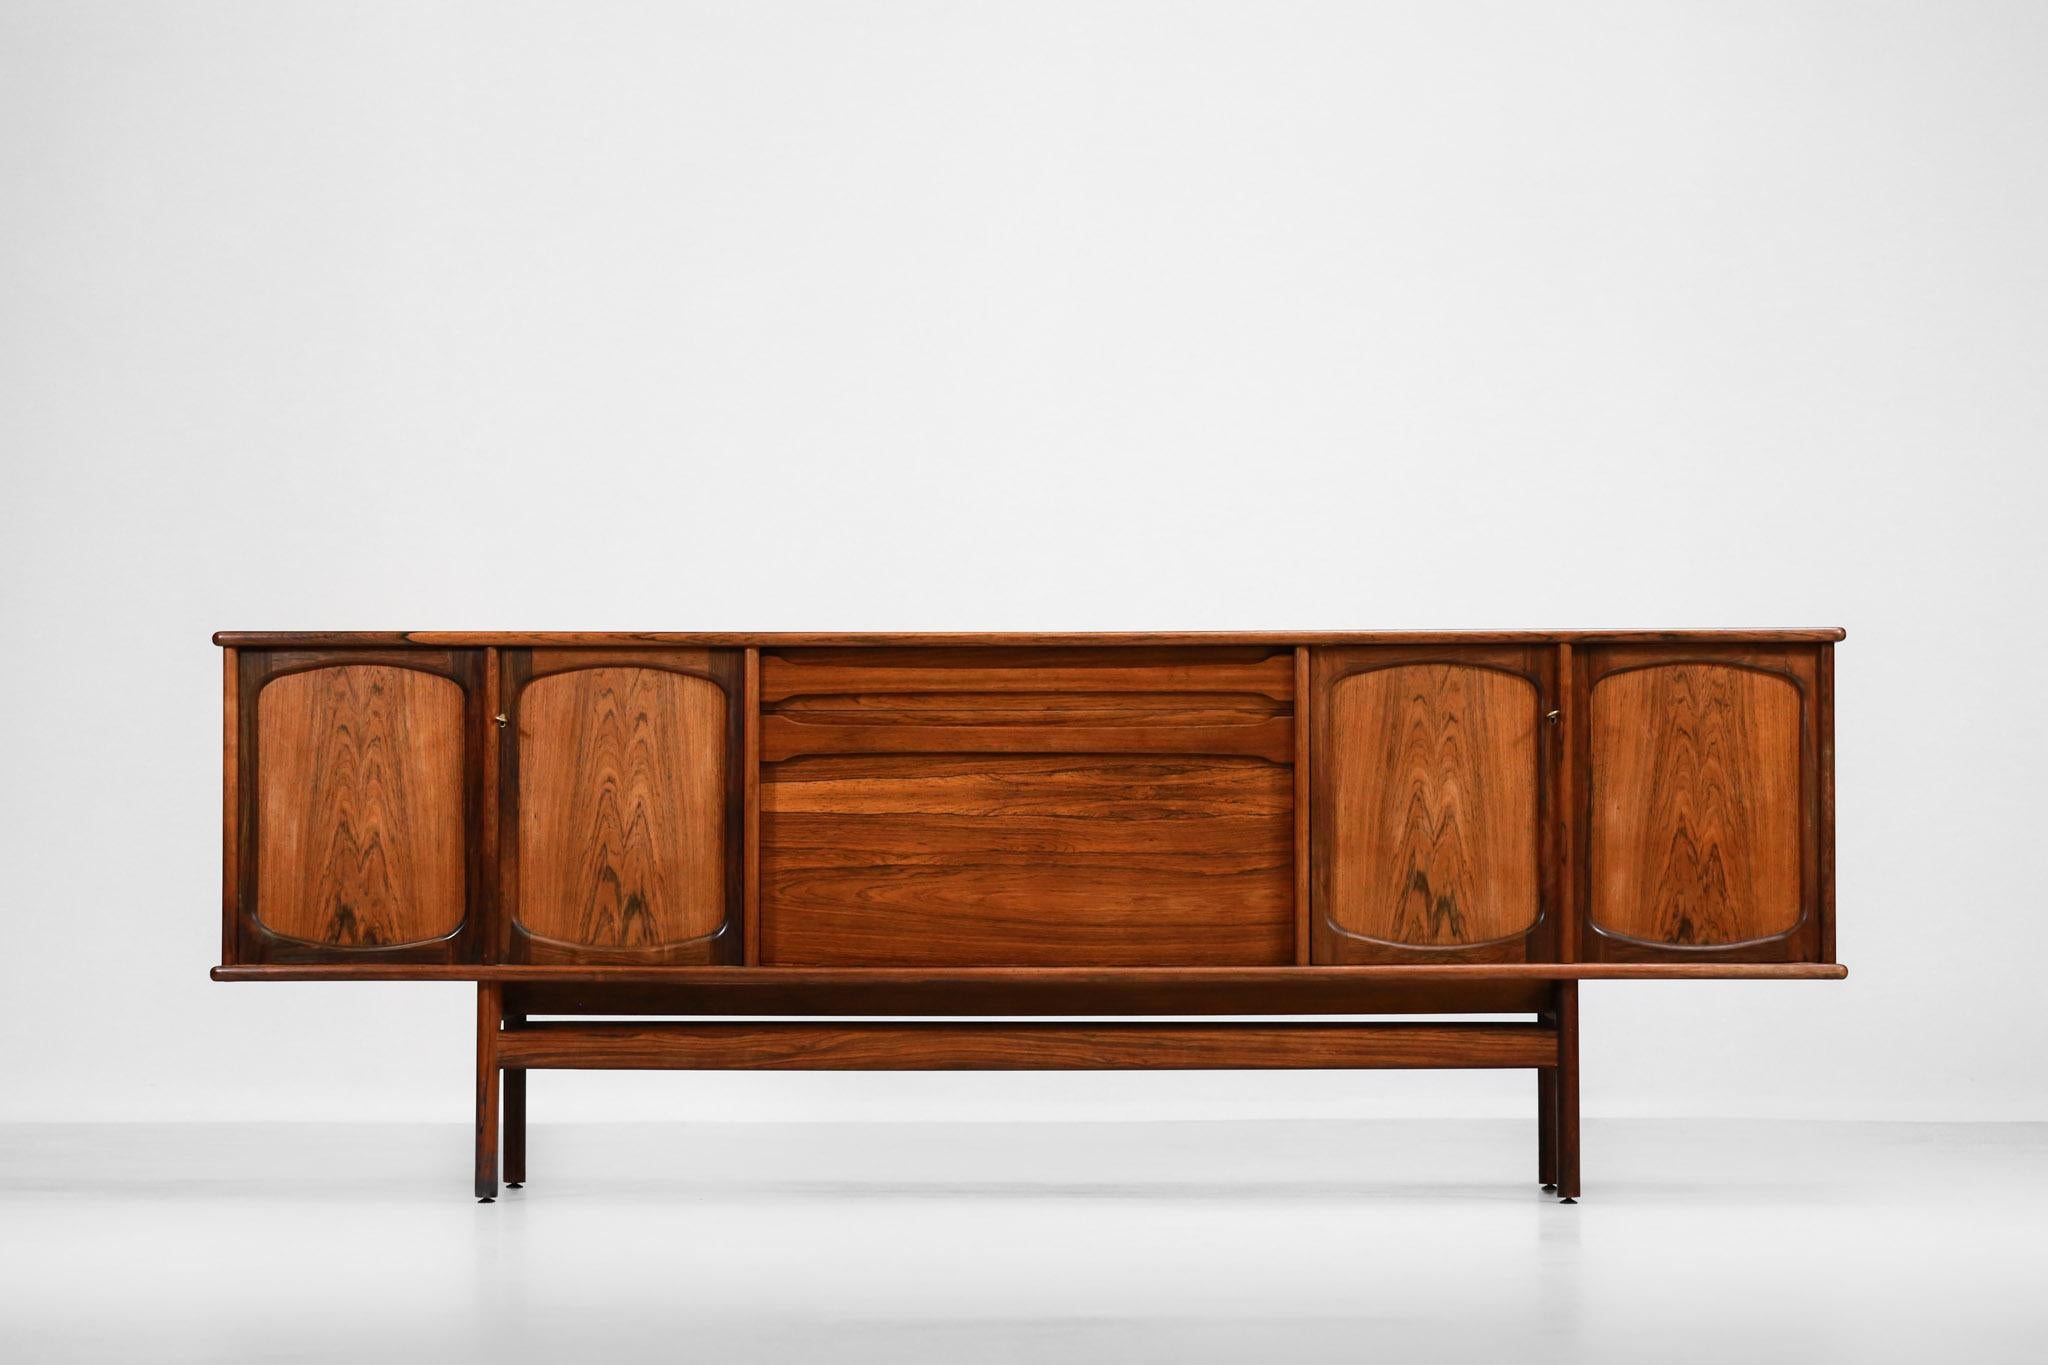 Danish sideboard from the 1960s designed by the Norwegian designer Gerhard Berg.
Structure in solid rosewood and veneered.
It is composed of four sliding doors and a central drawer overhanging a swing door opening onto a bar (keys supplied).
The